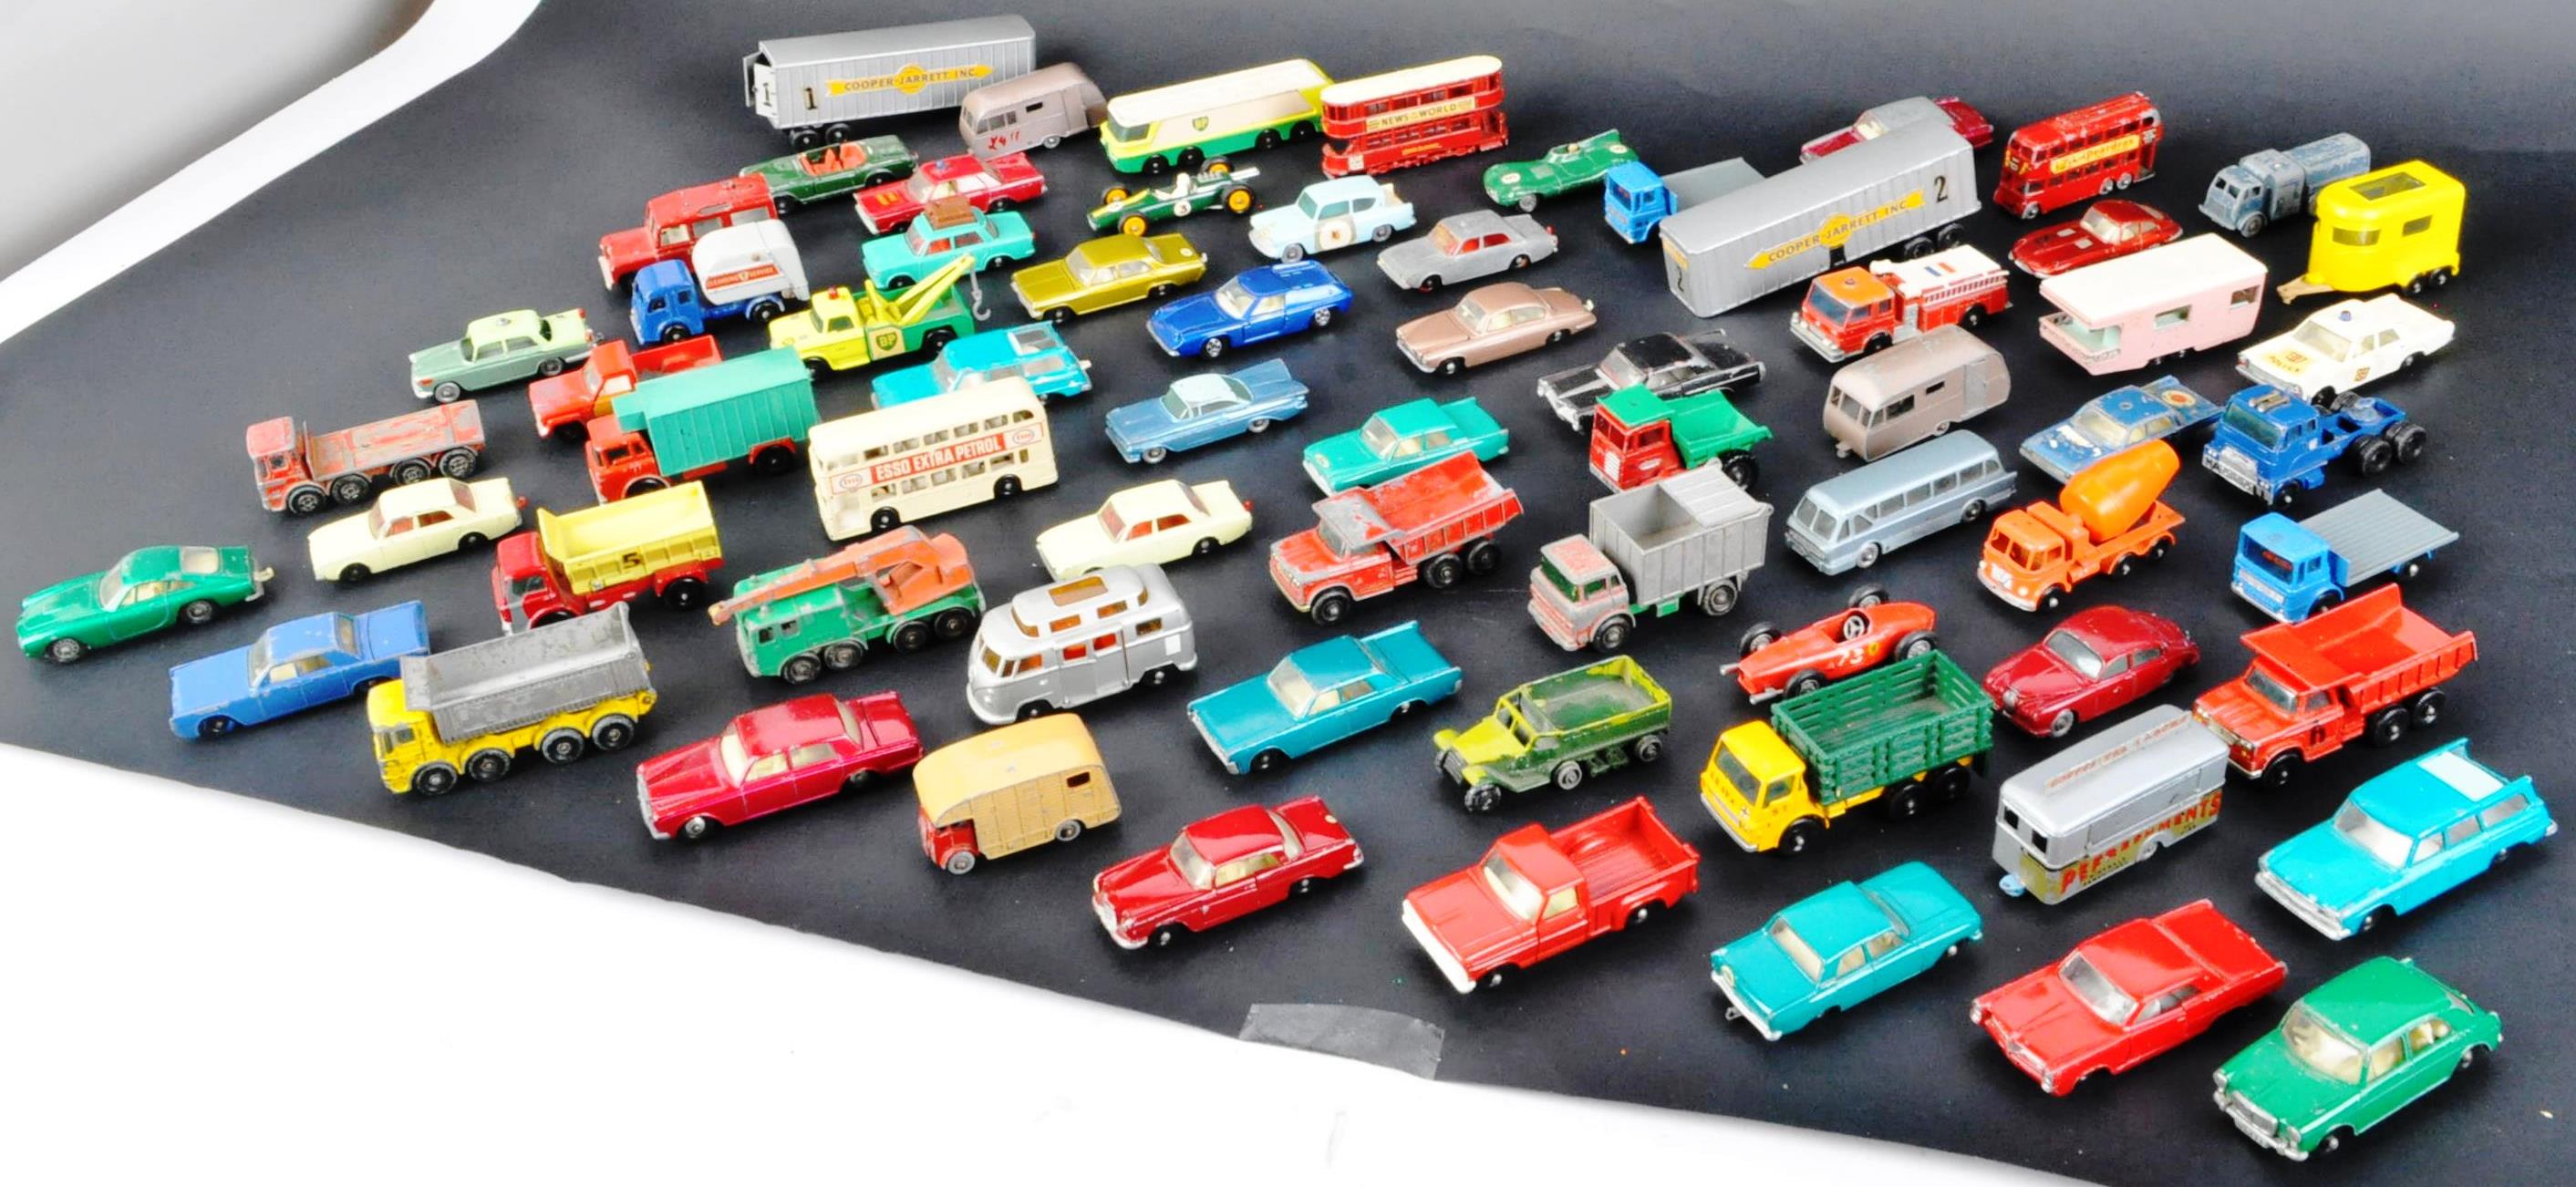 LARGE COLLECTION OF VINTAGE LESNEY DIECAST MODEL CARS